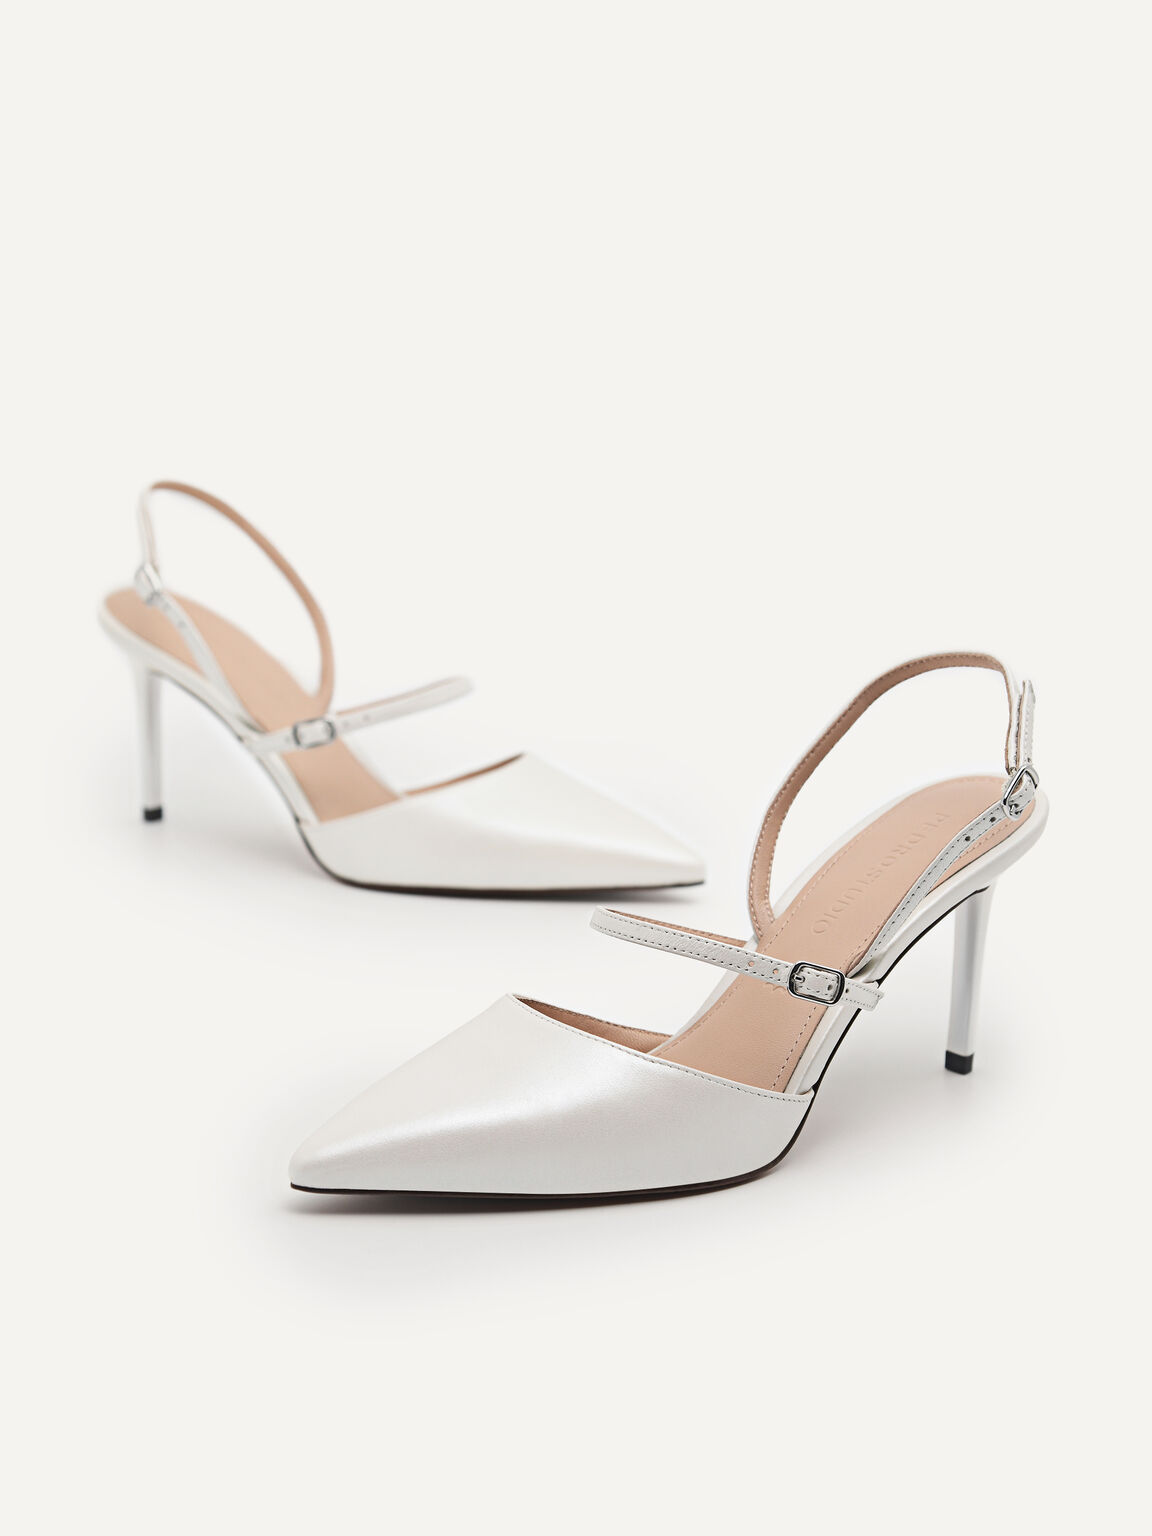 Maia Pearlized Effect Leather Slingback Pumps, Chalk, hi-res